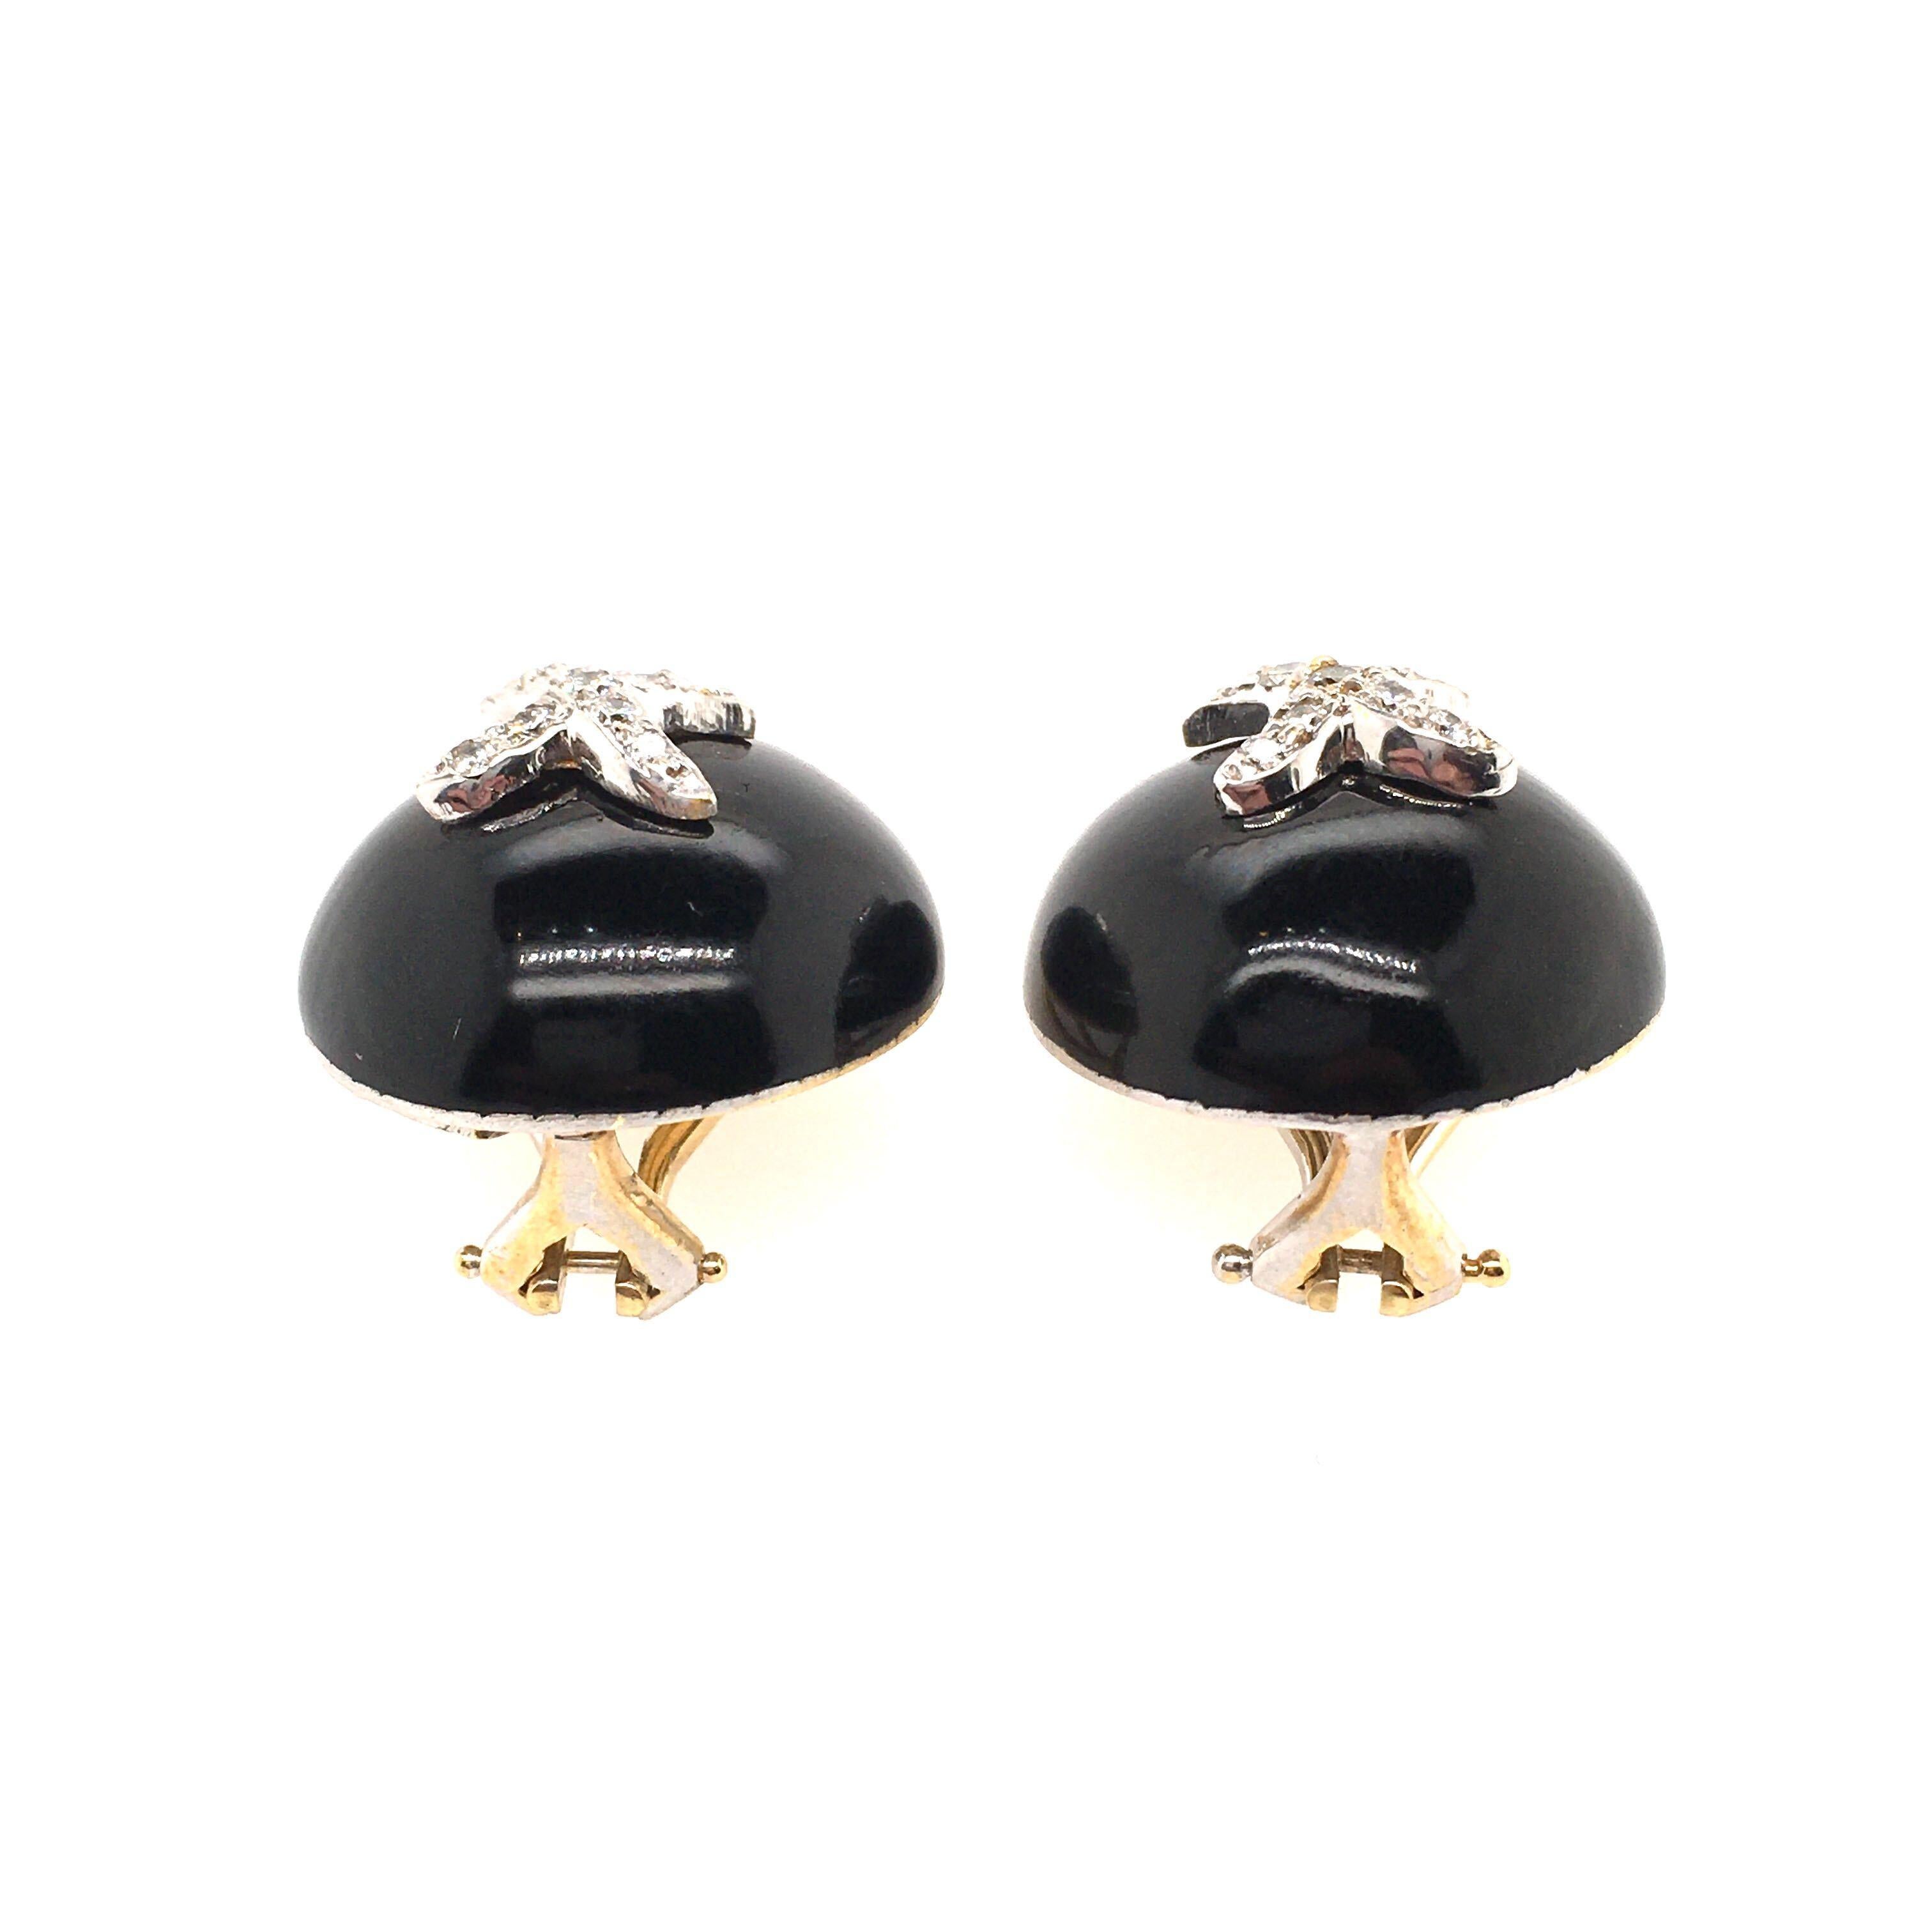 A pair of 18 karat yellow gold, enamel and diamond earrings. Hidalgo. Designed as a black enamel domed button, enhanced by a pave set diamond X motif. Diameter is approximately 5/8 inches, gross weight is approximately 17.8 grams. Stamped Hidalgo,